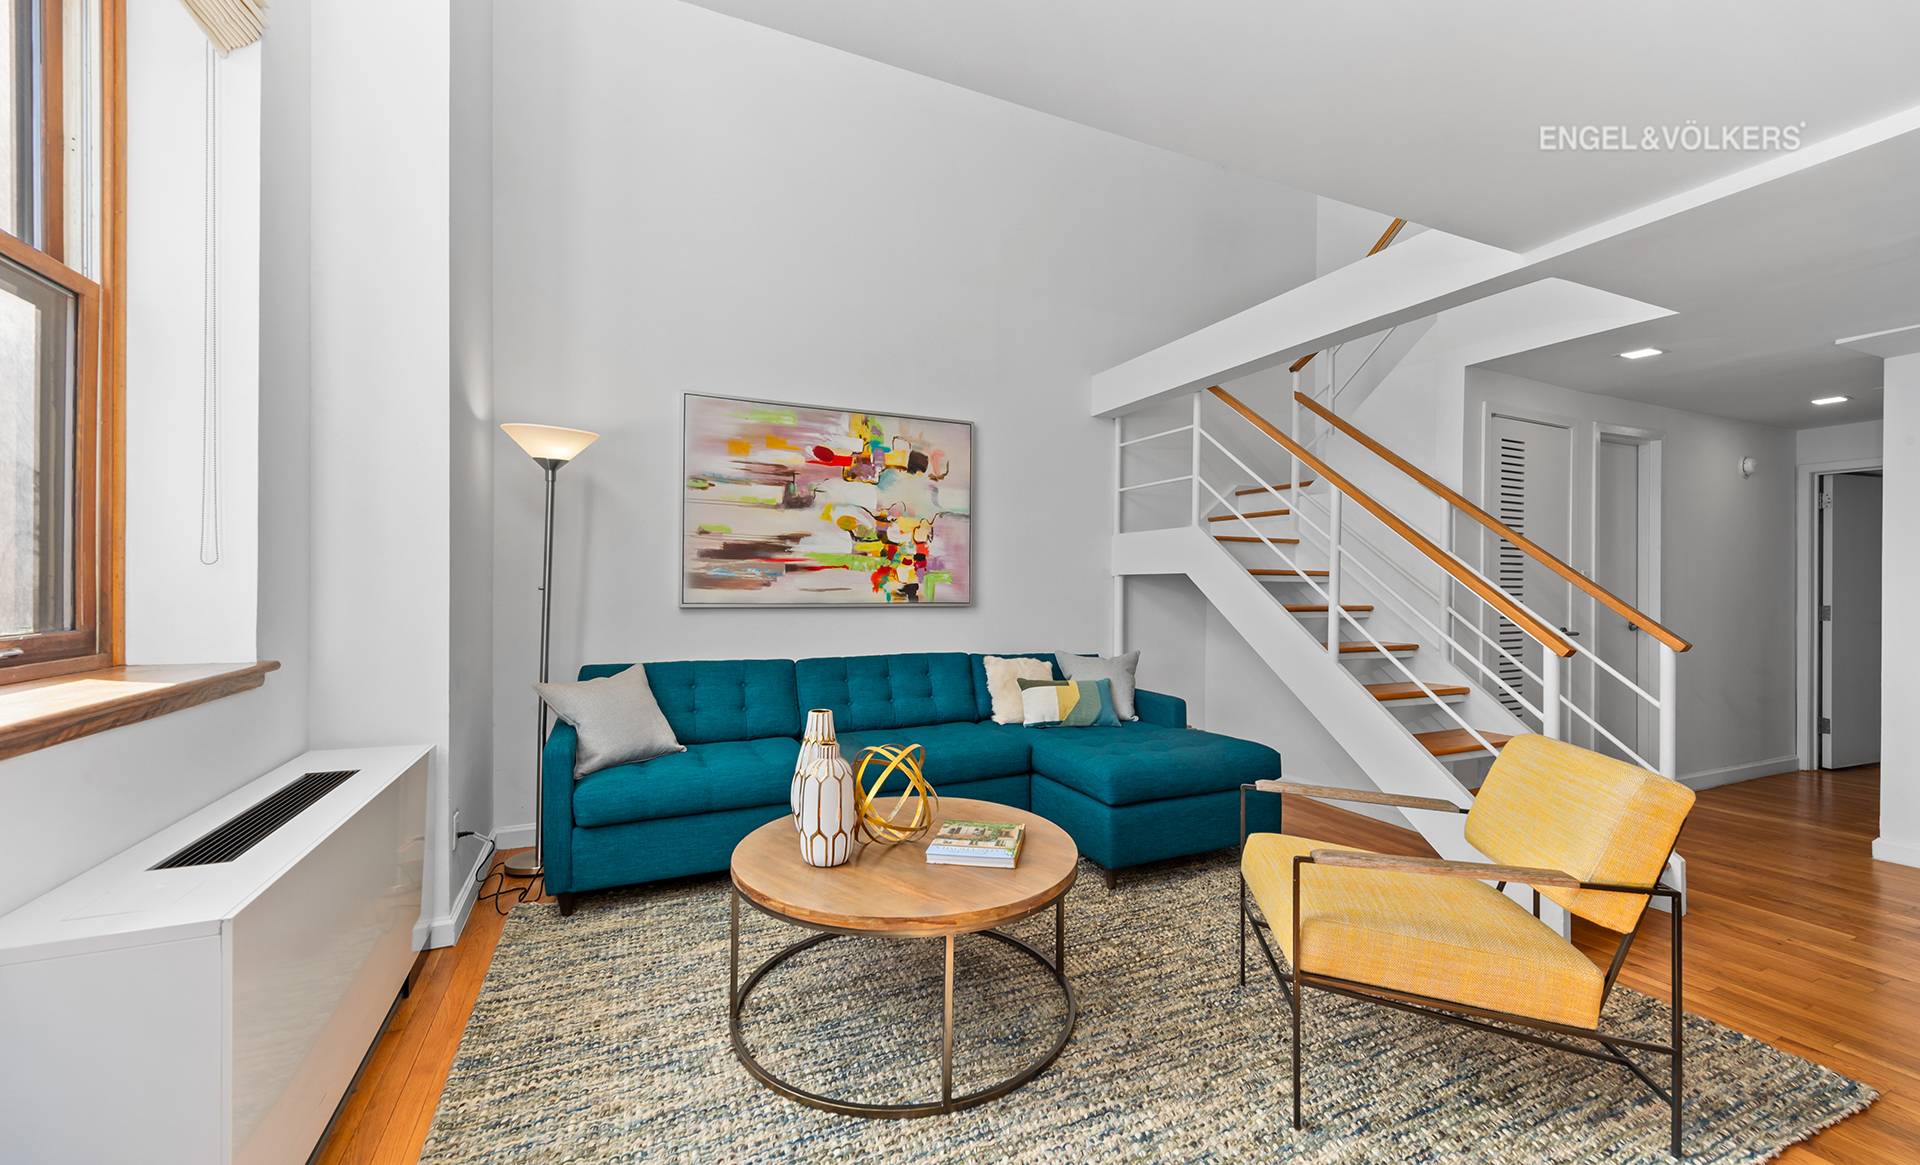 DRAMATIC 2 BEDROOM DUPLEX CONDO SOARING 16 FOOT CEILINGS DOUBLE EXPOSURE Be WOWED by Apartment 721, a fabulous home in the iconic Rutherford Place Condominium in the Gramercy area.